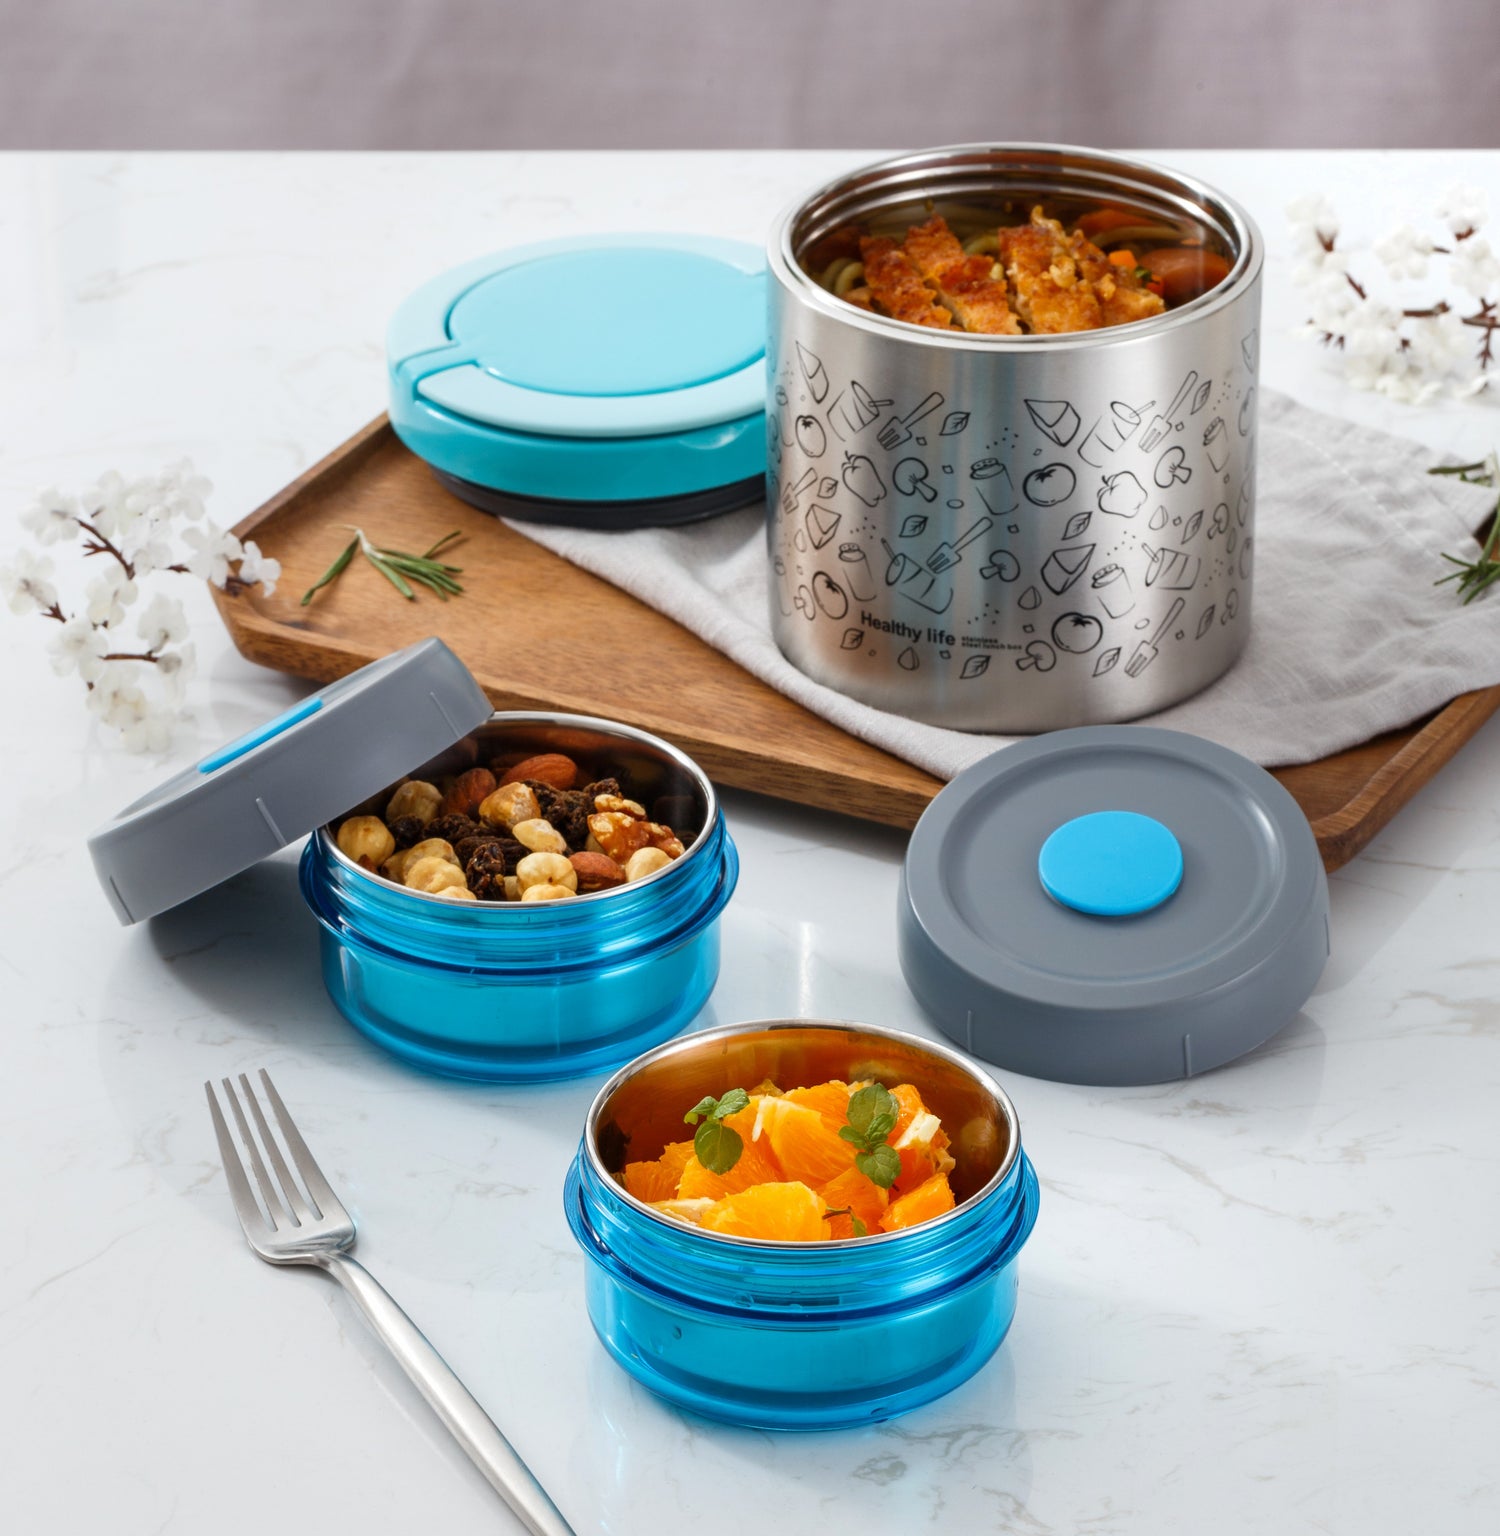  Lille Home Lunch Box Set, A Vacuum Insulated Bento/Snack Box  Keeping Food Warm for 4-6 Hours, Two Stainless Steel Food Containers, A Lunch  Bag, A Portable Cutlery Set (Blue): Home 